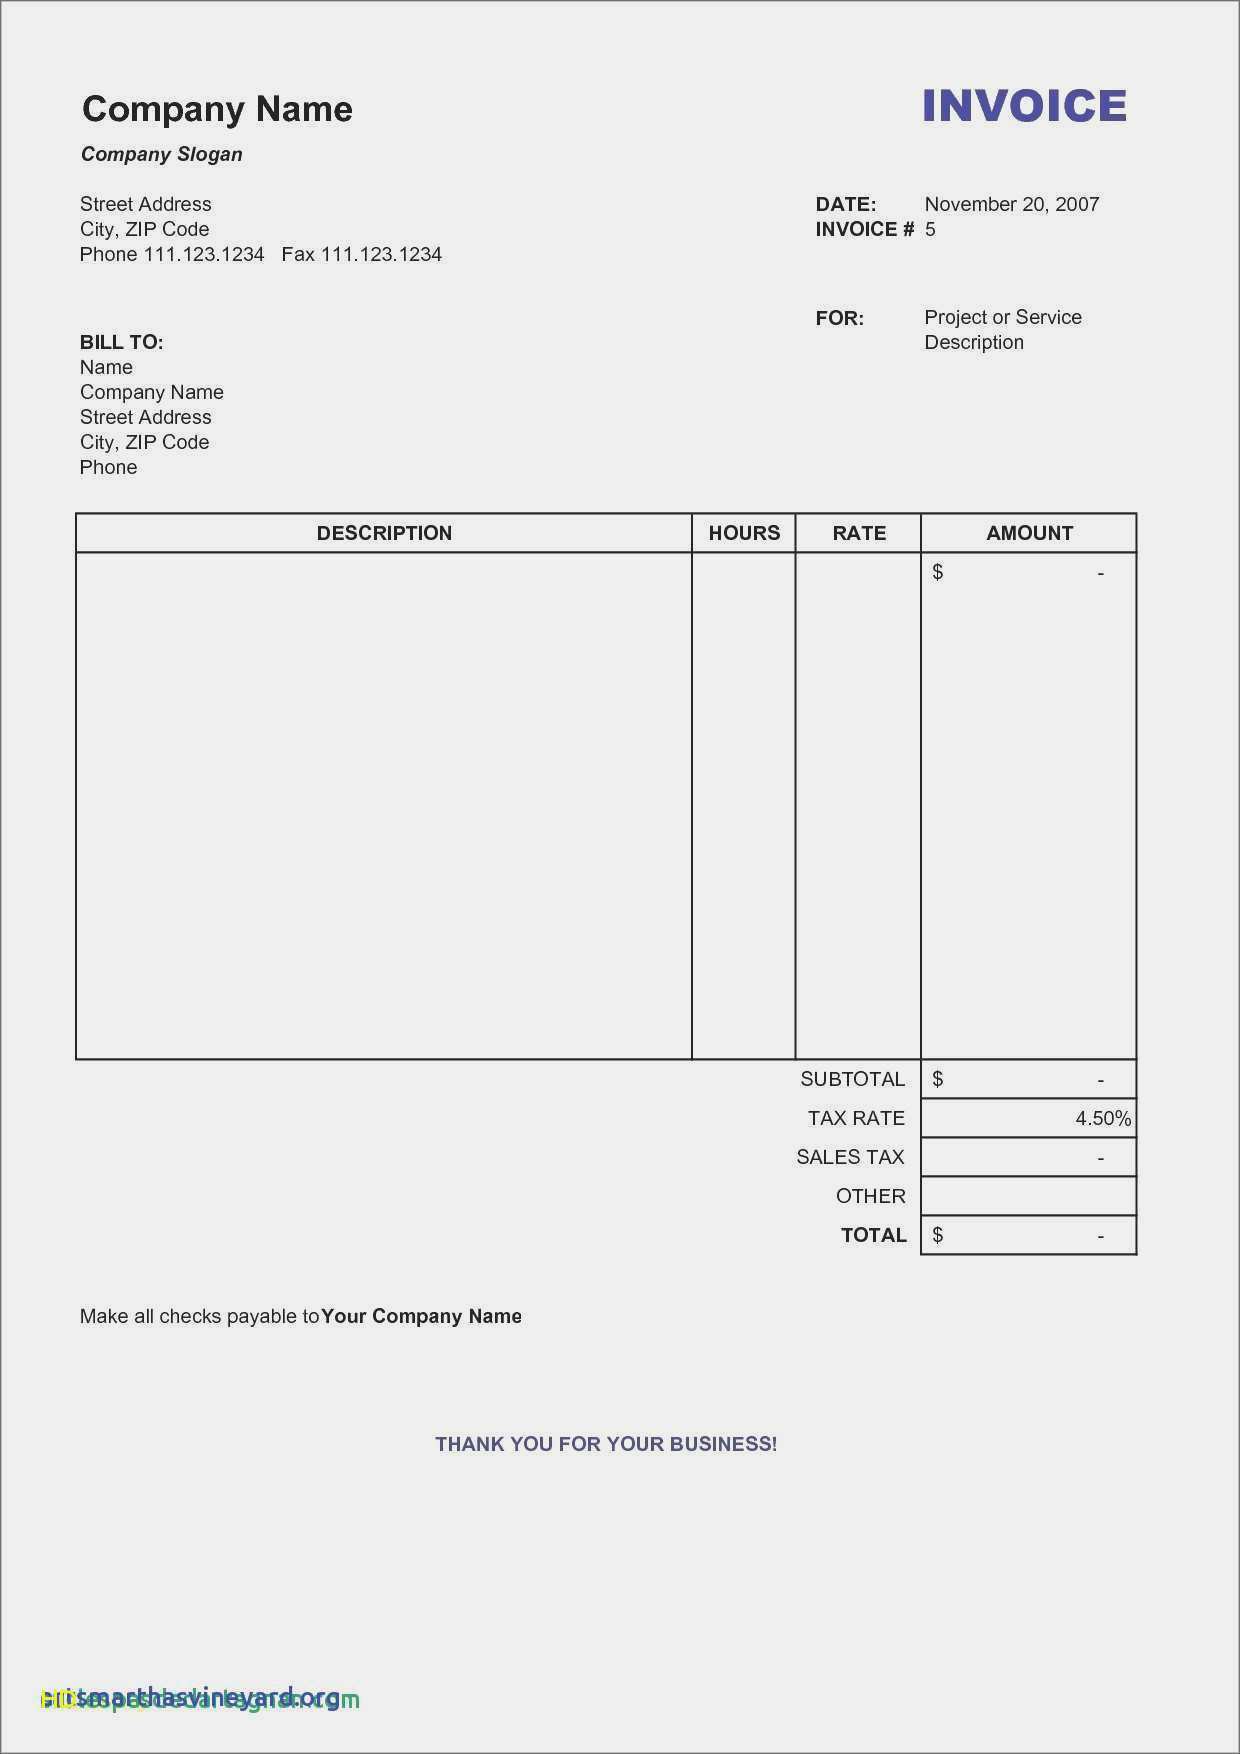 85 Customize Blank Invoice Format Pdf Layouts for Blank Invoice Format Pdf